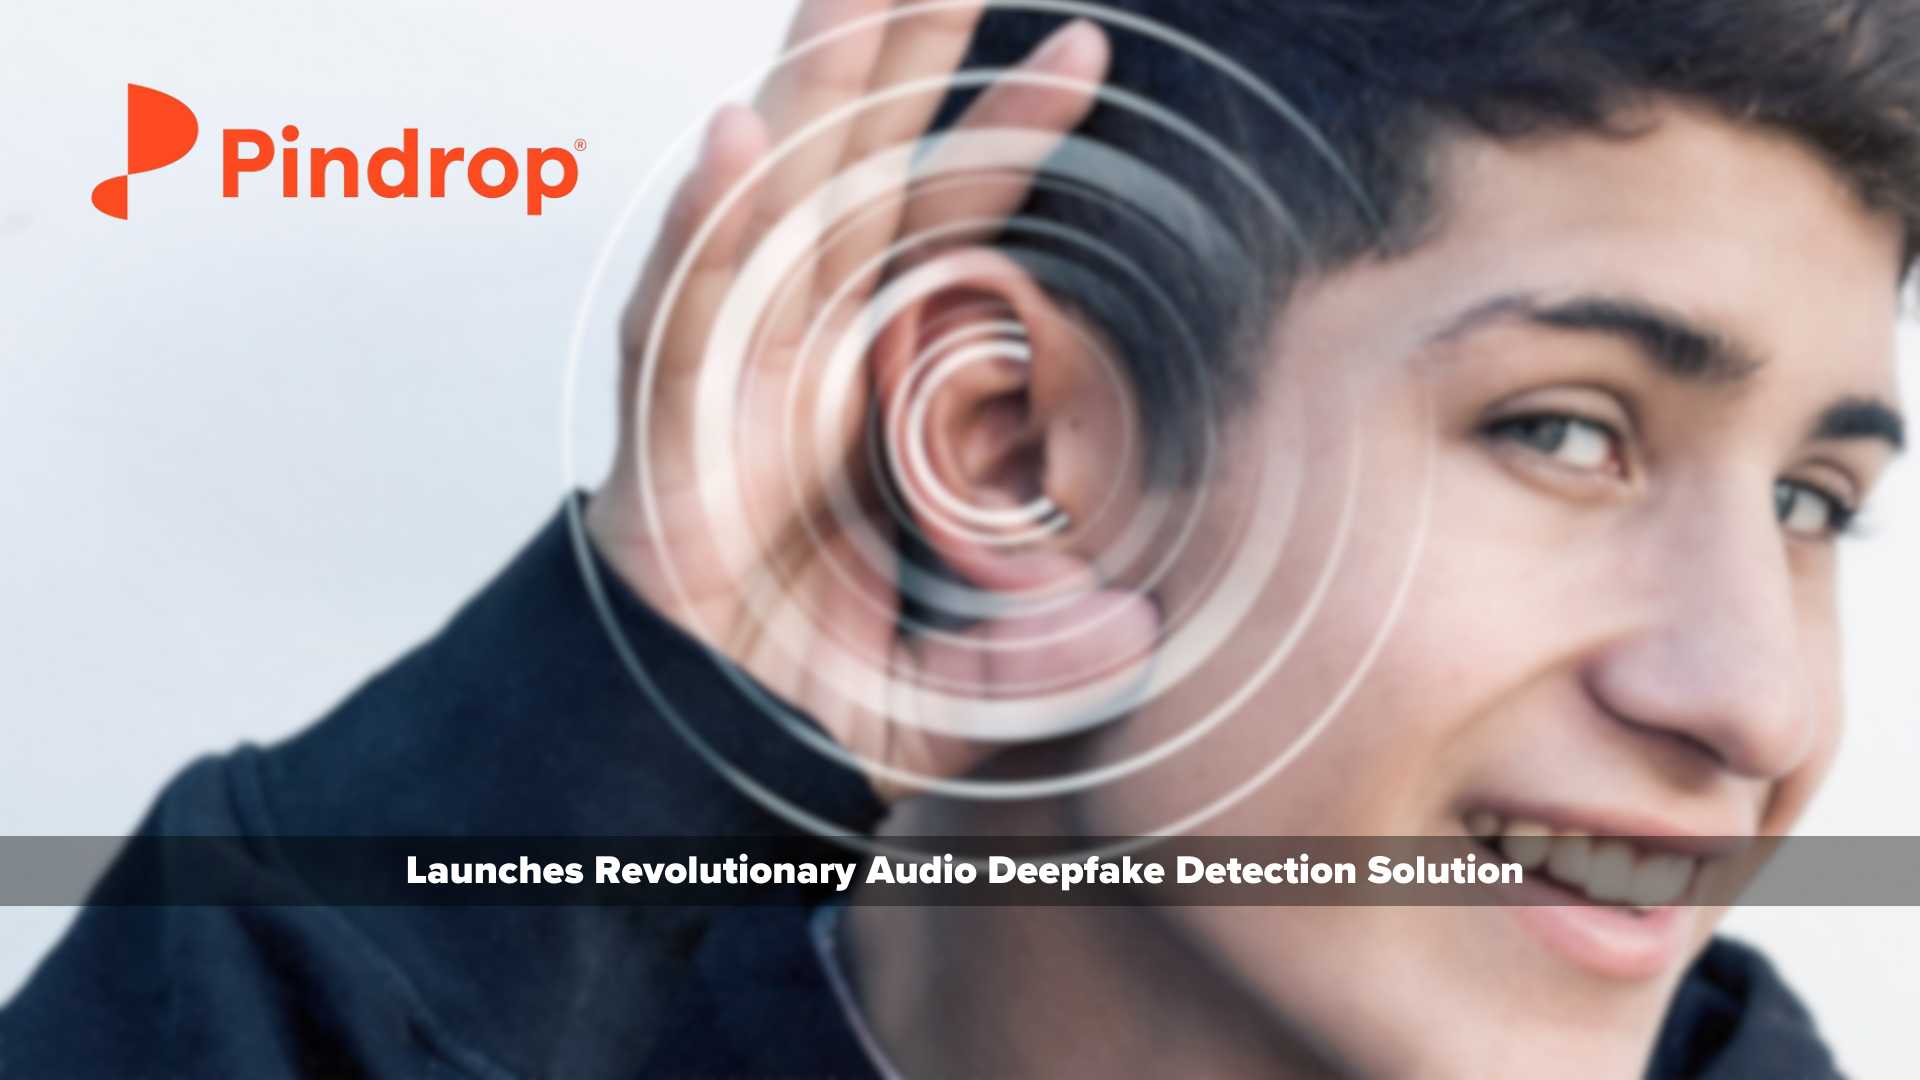 Pindrop Launches Revolutionary Audio Deepfake Detection Solution to Bring Trust Back to Remote Communication